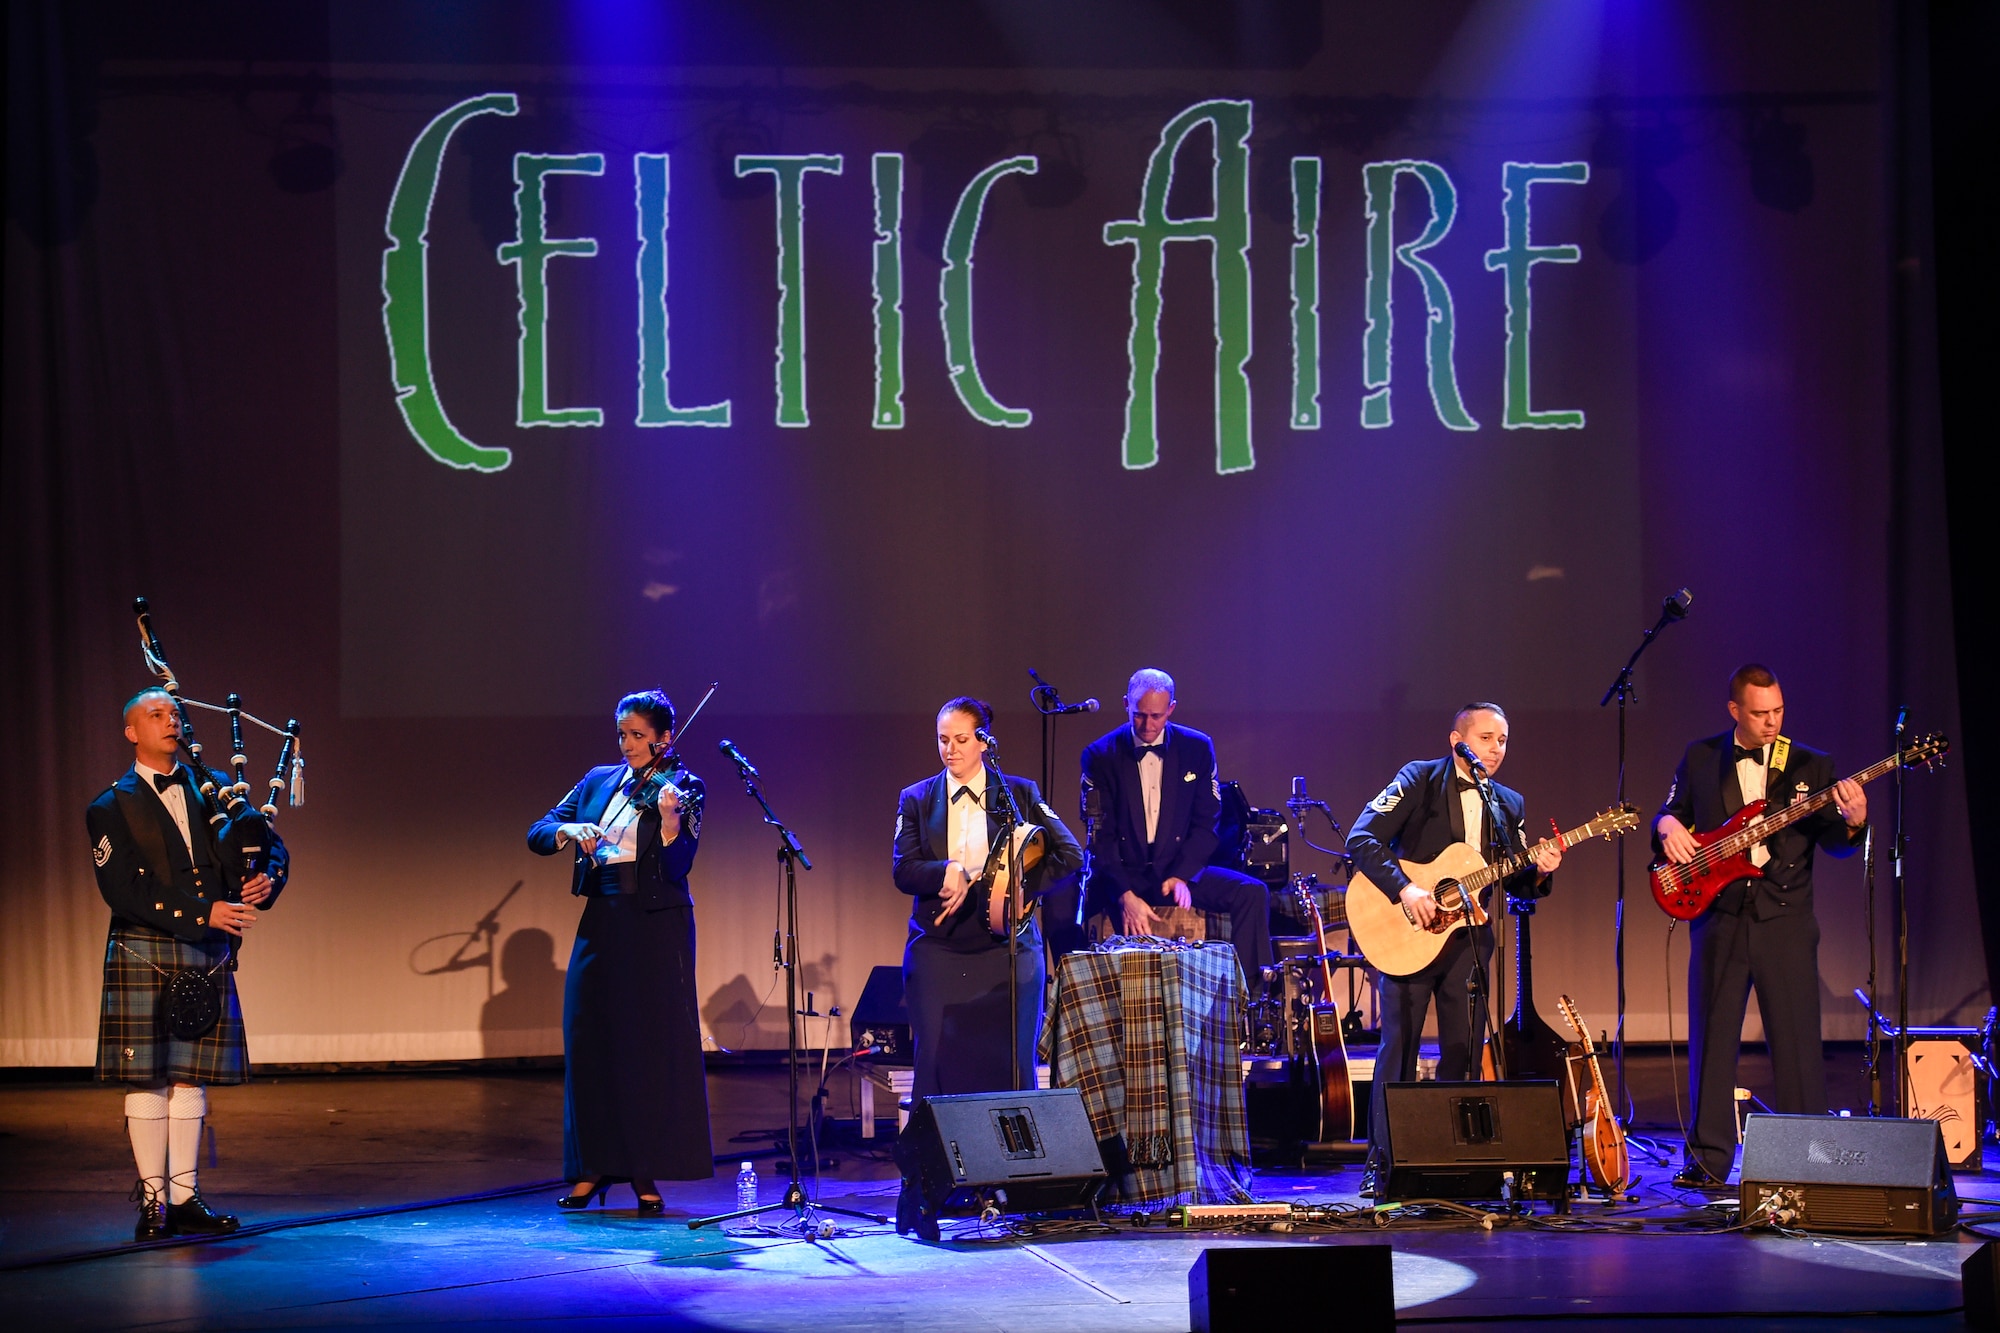 The United States Air Force Band’s Celtic Aire performs at the Wichita Falls Performing Arts Centre in Wichita Falls, Texas, March 11, 2016. This show was part of a North Texas tour from March 4 – 12. (U.S. Air Force photo by Senior Airman Ryan J. Sonnier/RELEASED)